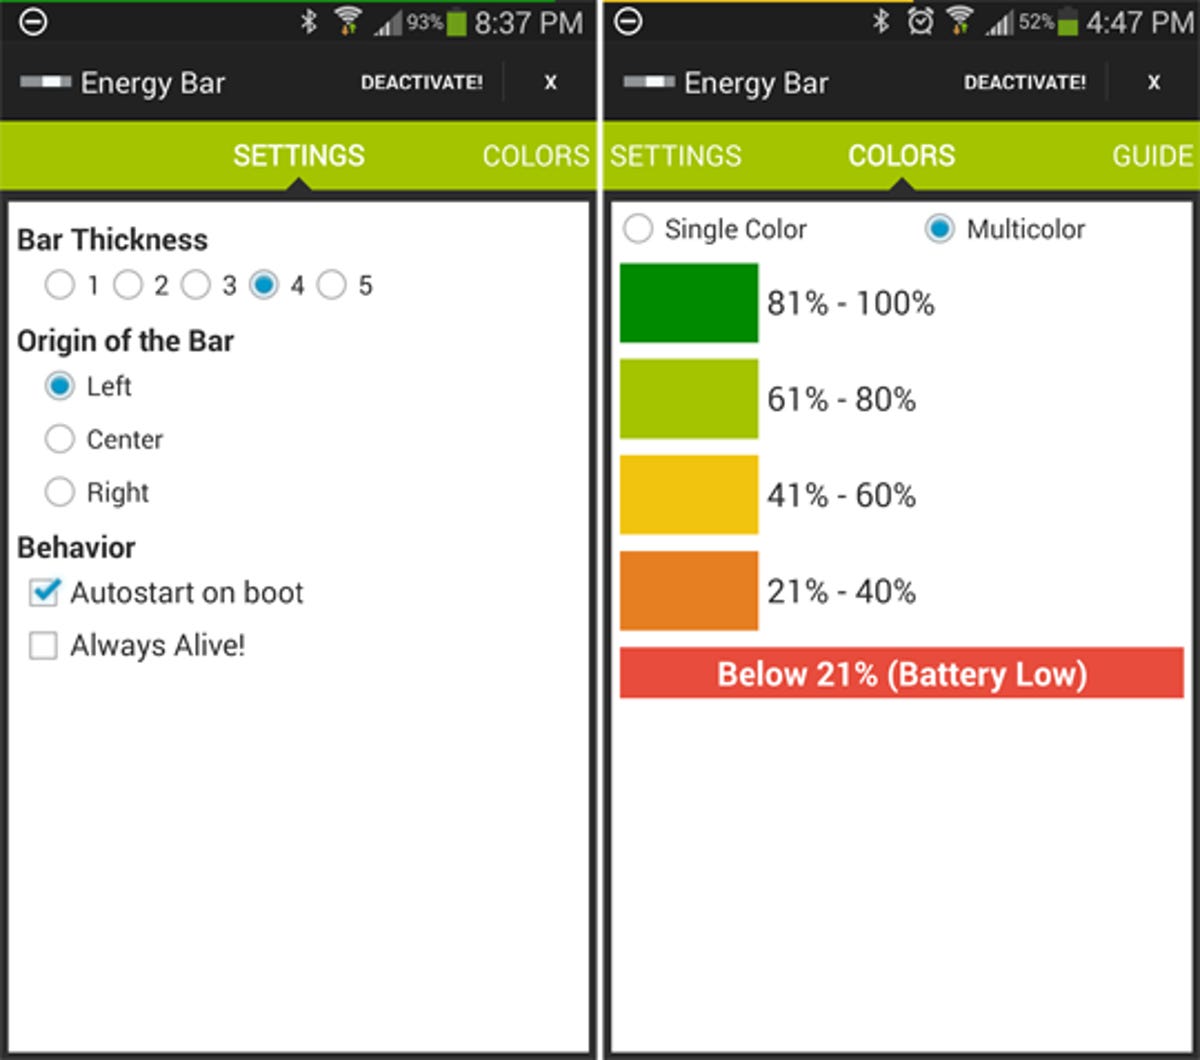 Energy Bar for Android settings